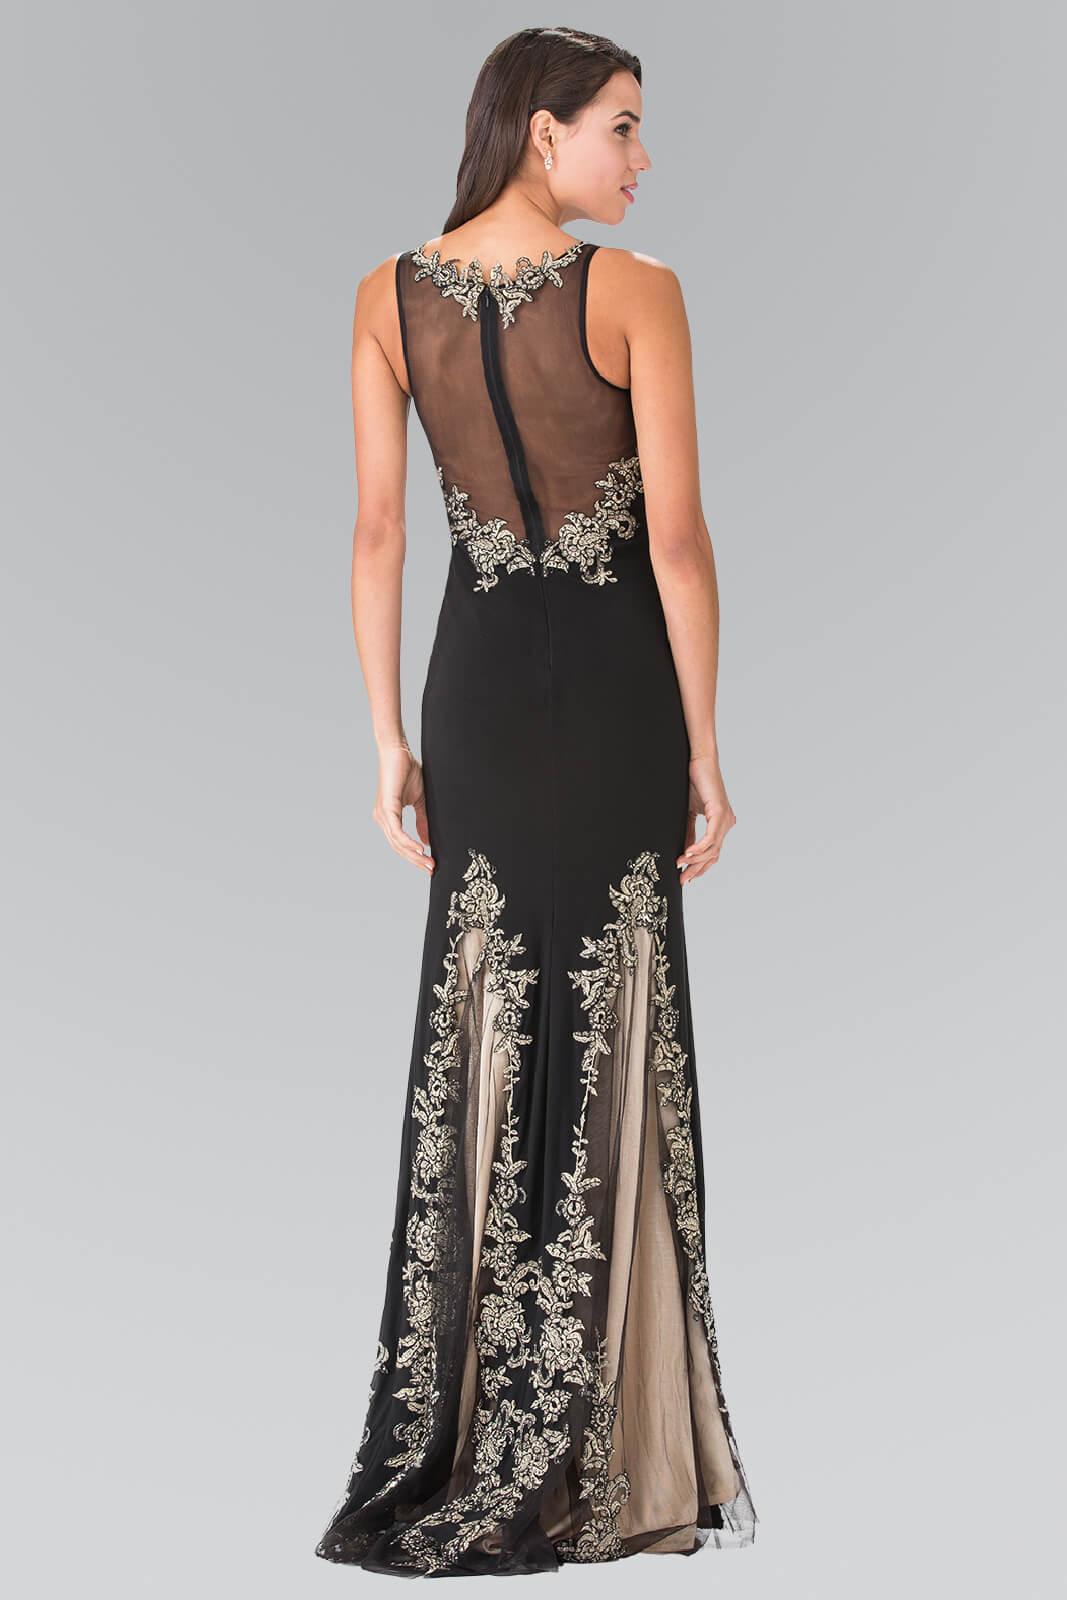 Long Formal Fitted Prom Dress Evening Gown Sale - The Dress Outlet